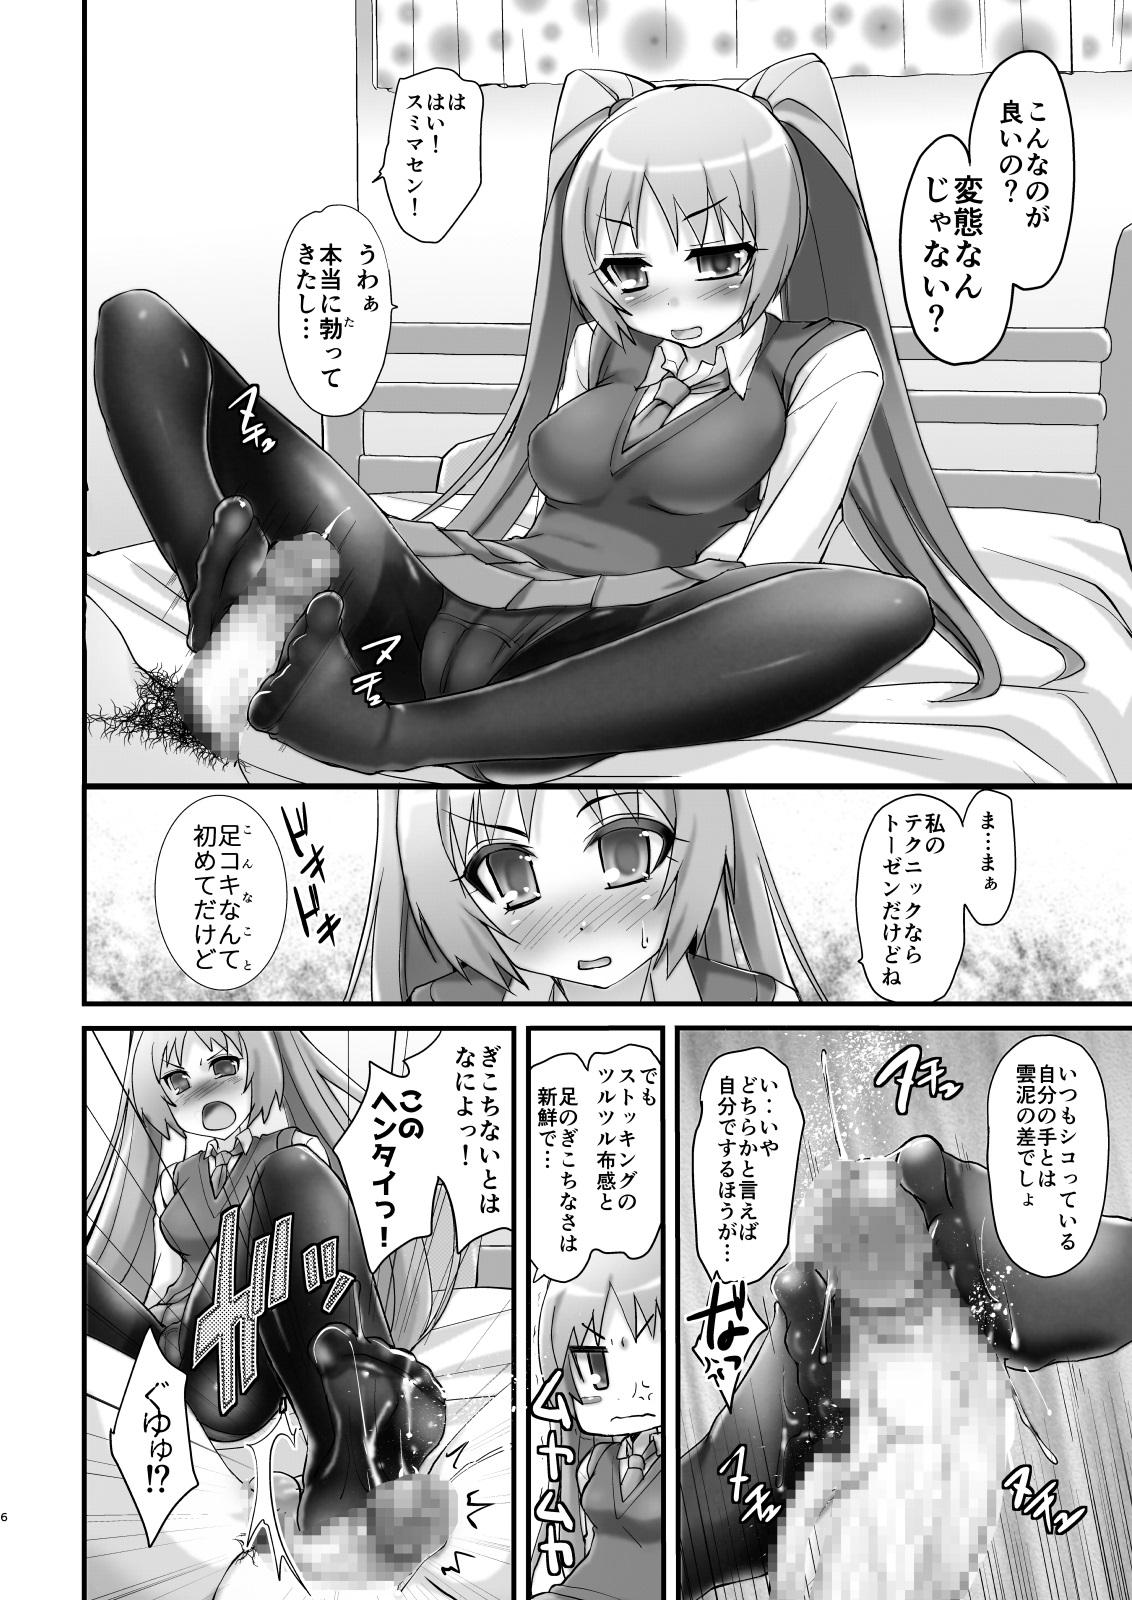 Ameture Porn Tsundere Tights to Twintails - Original Ddf Porn - Page 6